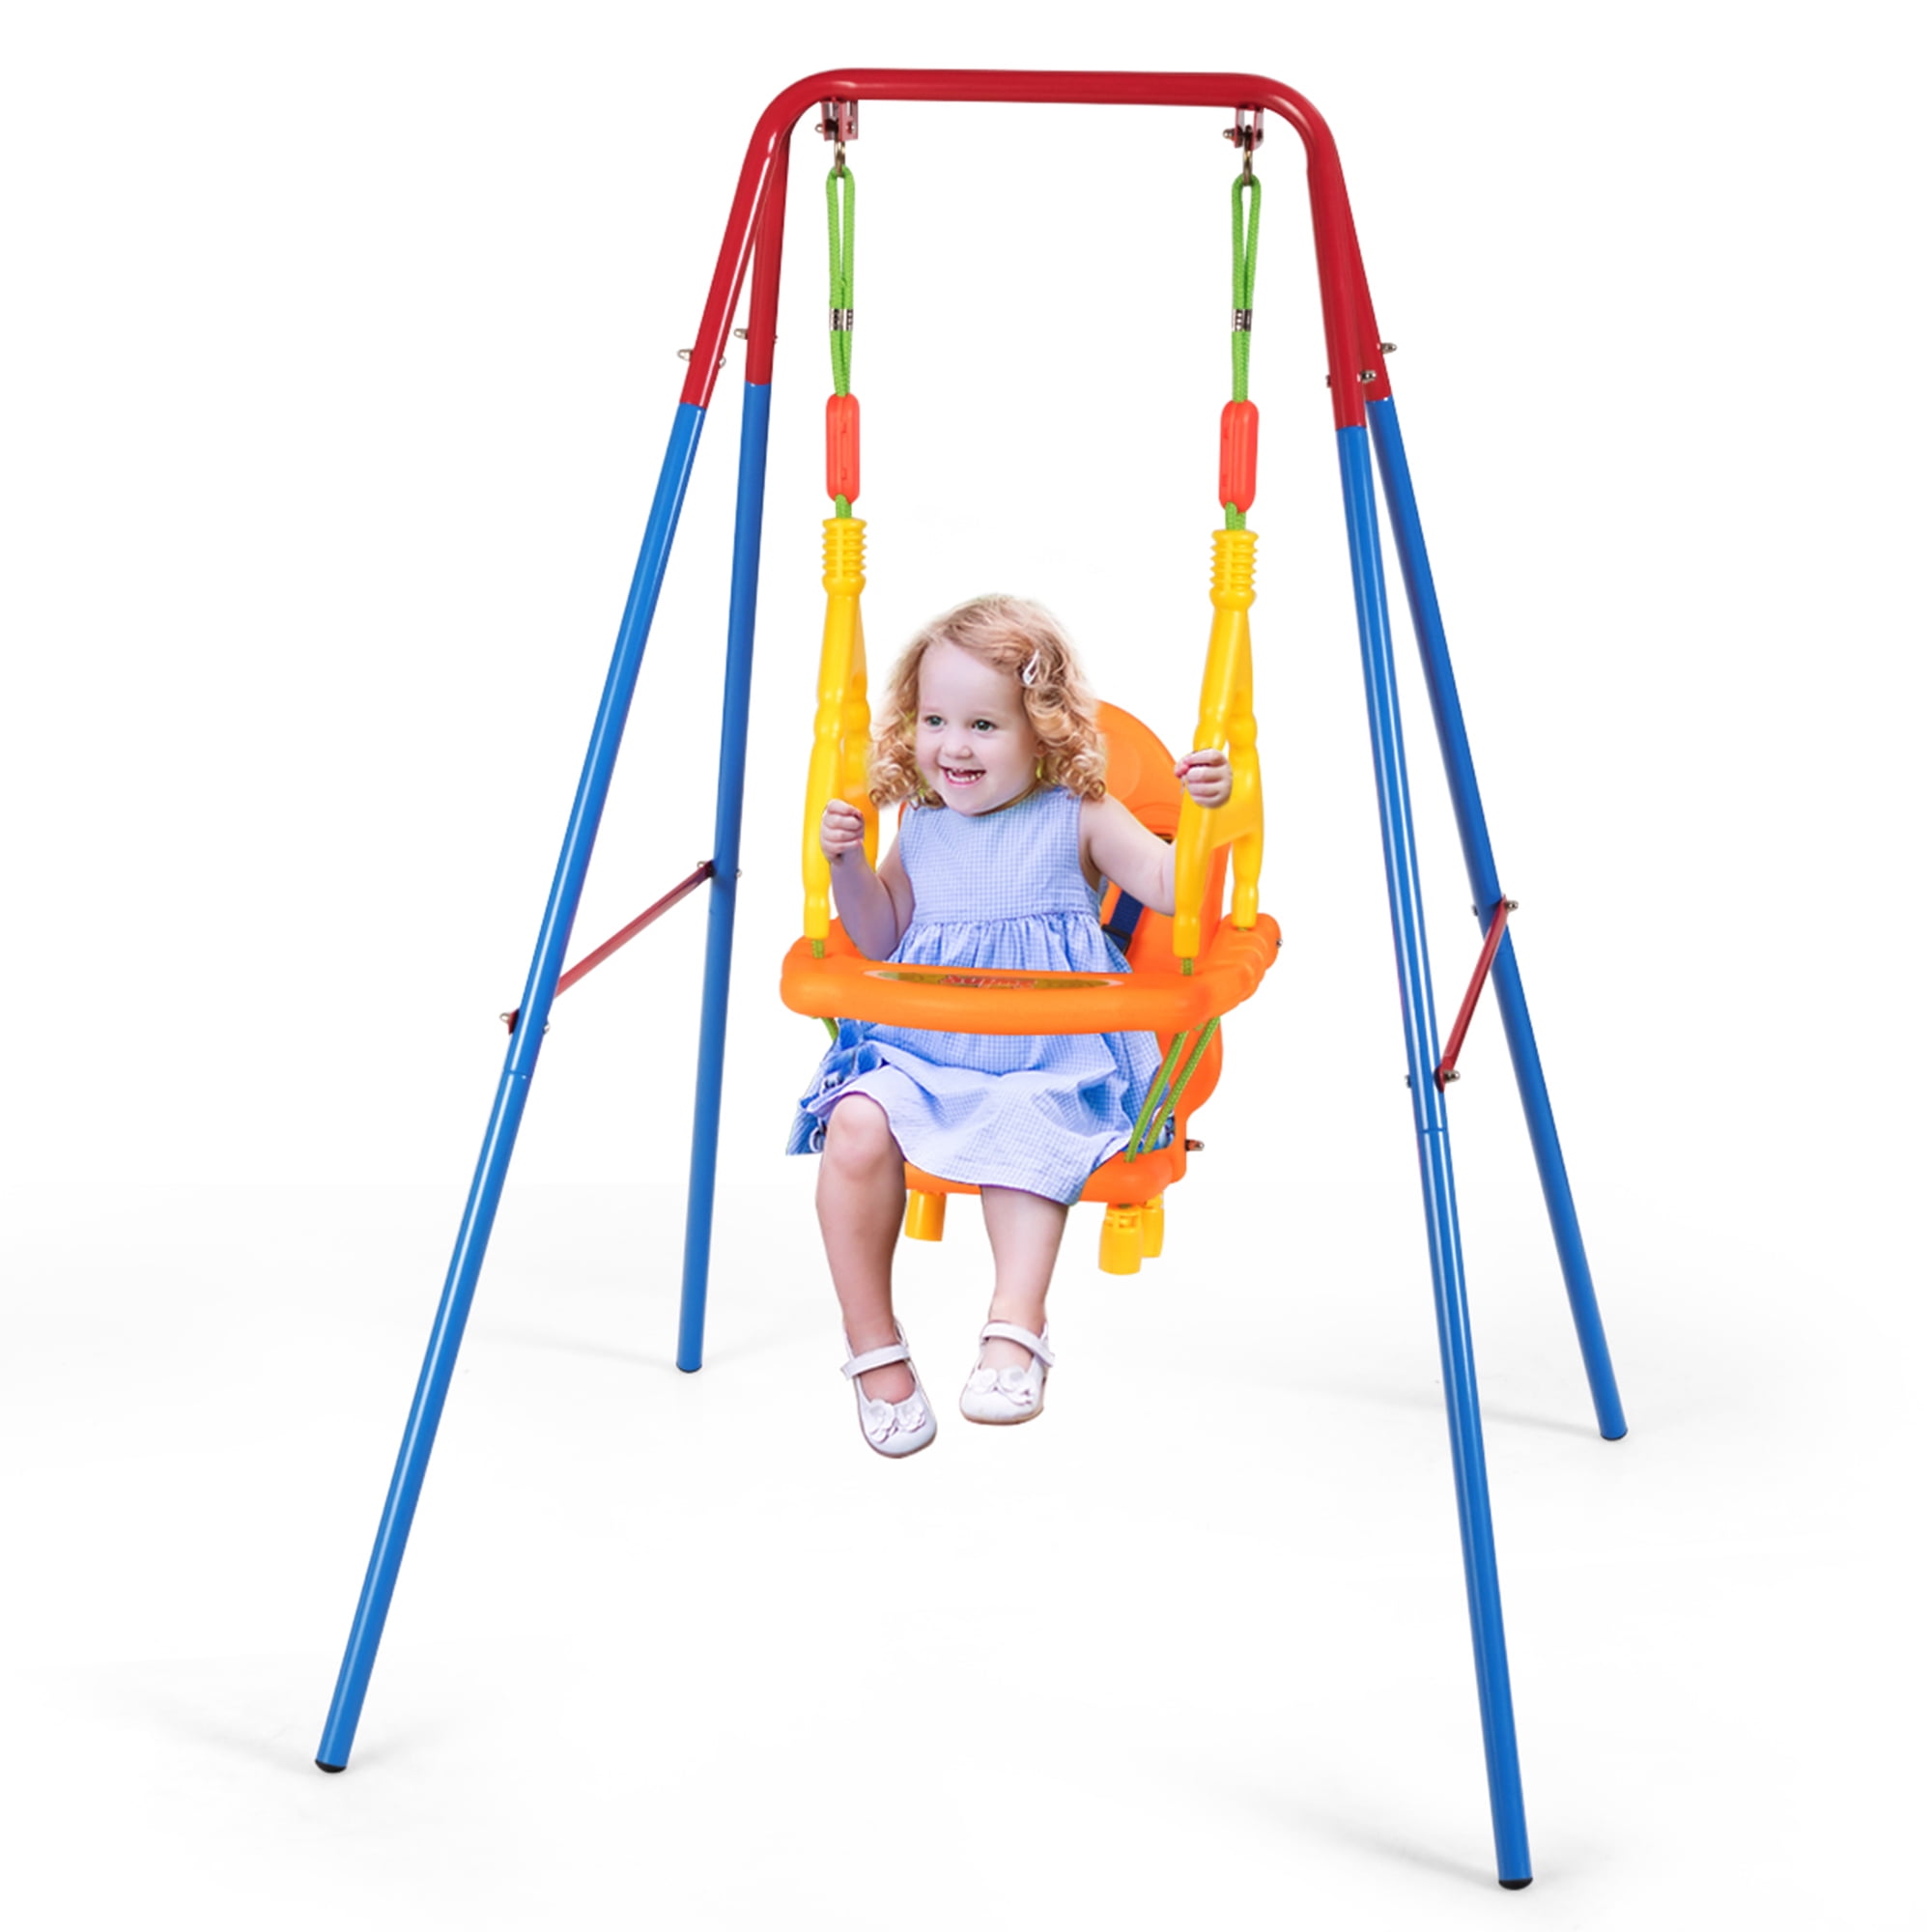 Blue OneConcept Miri Kids Outdoor Swing Frame Garden Swing Children Stable Robust Single-Seat, Up to 45kg, Rugged Construction